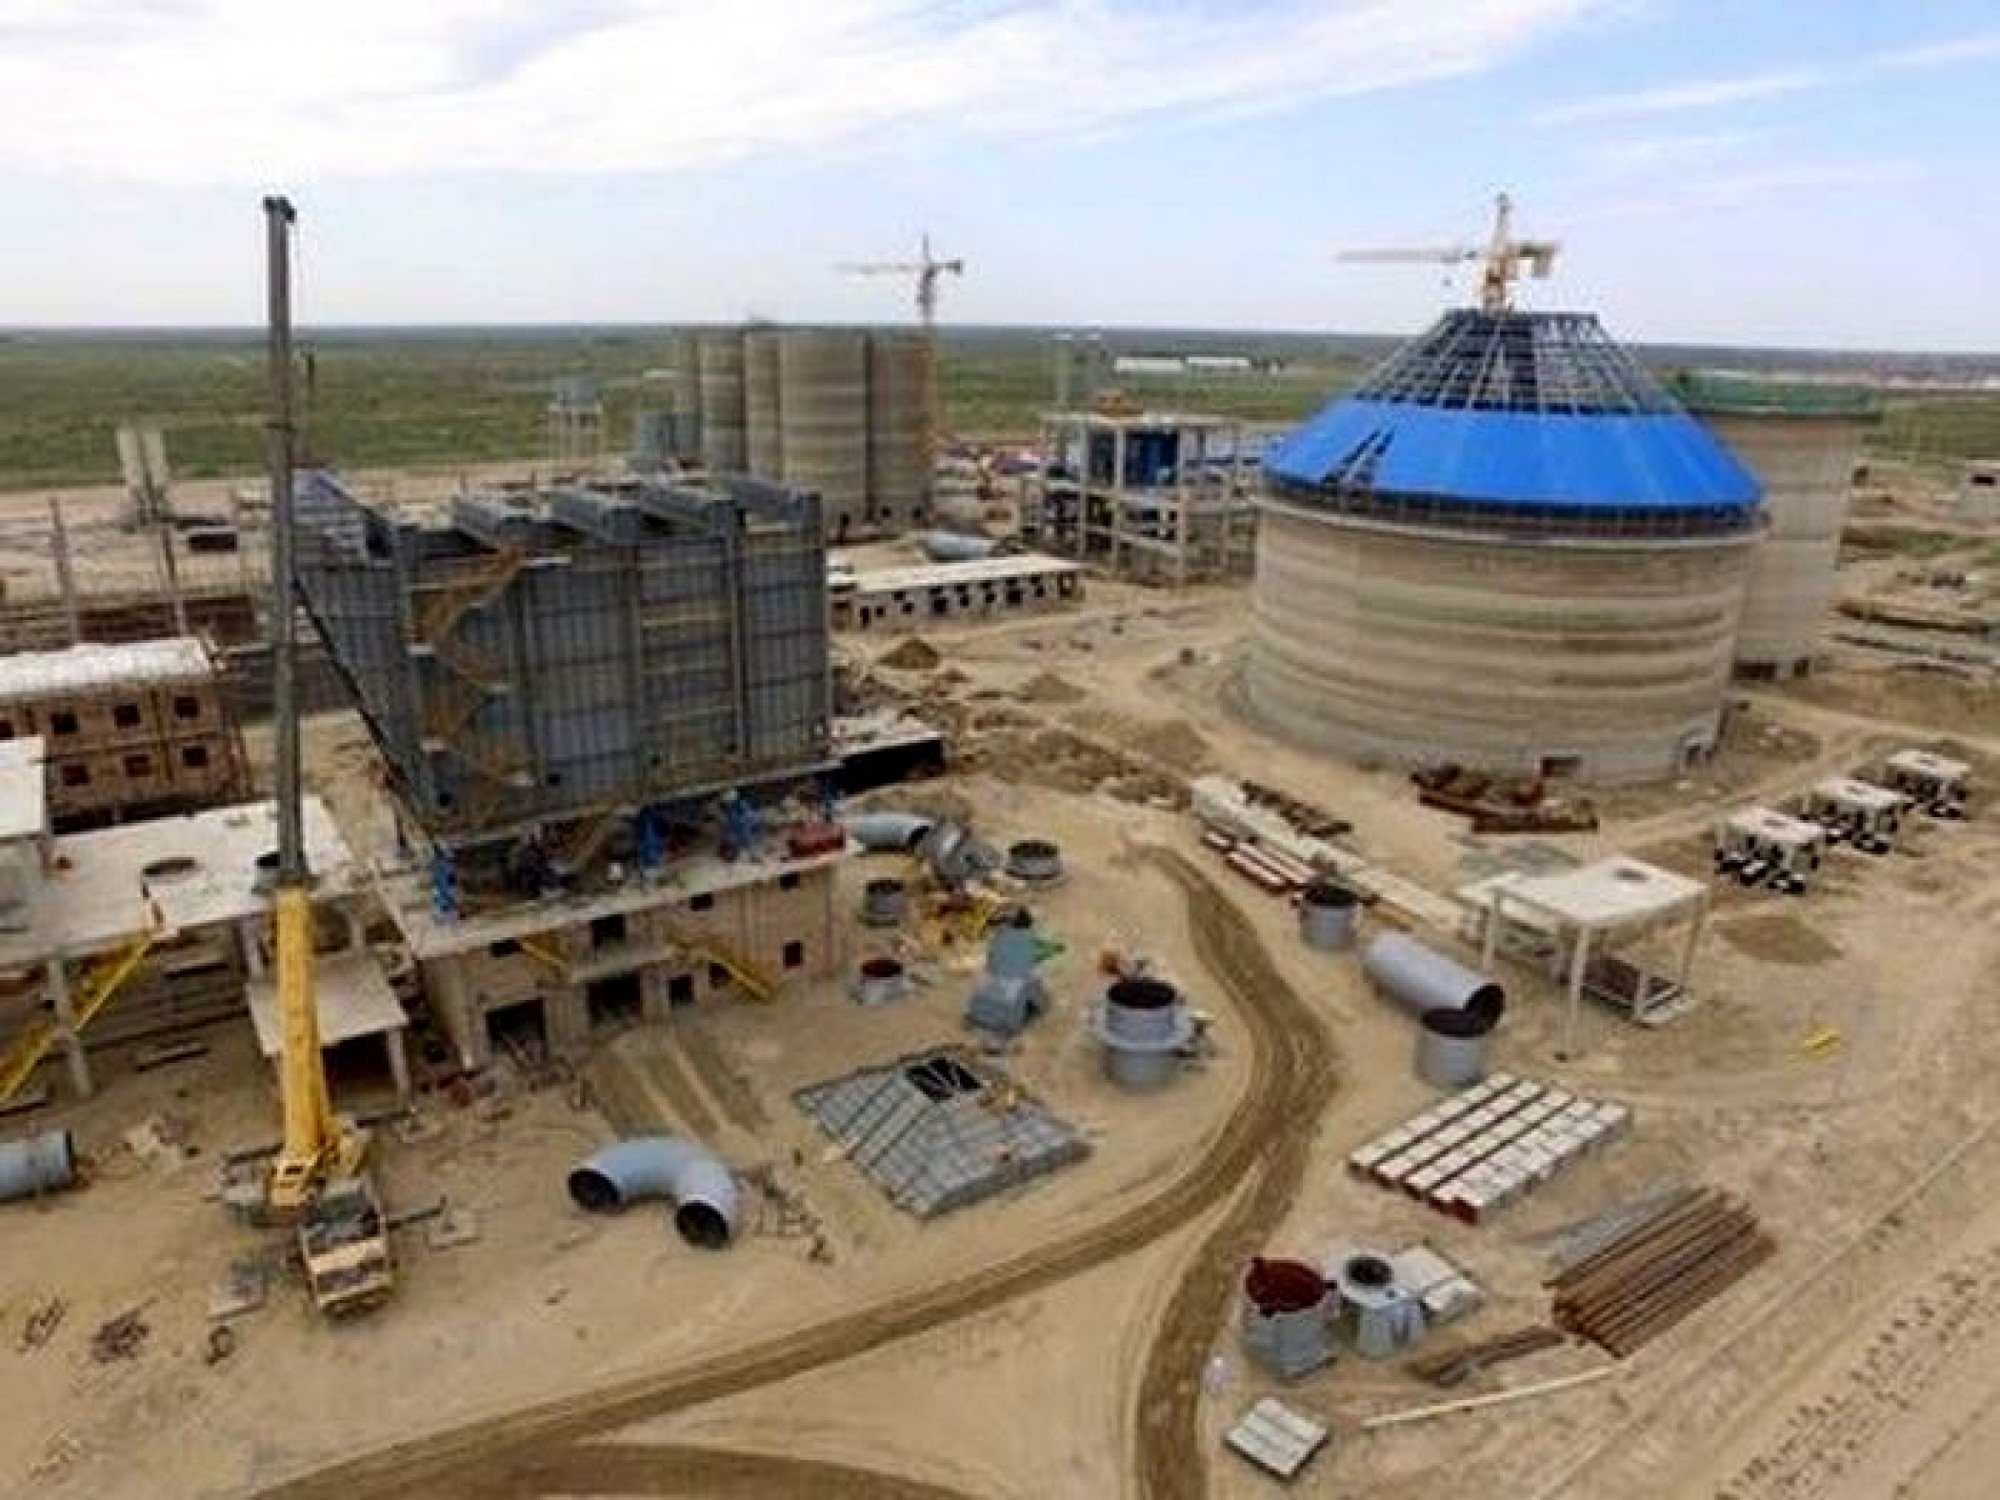 New production in Kyzylorda region will provide jobs for local residents